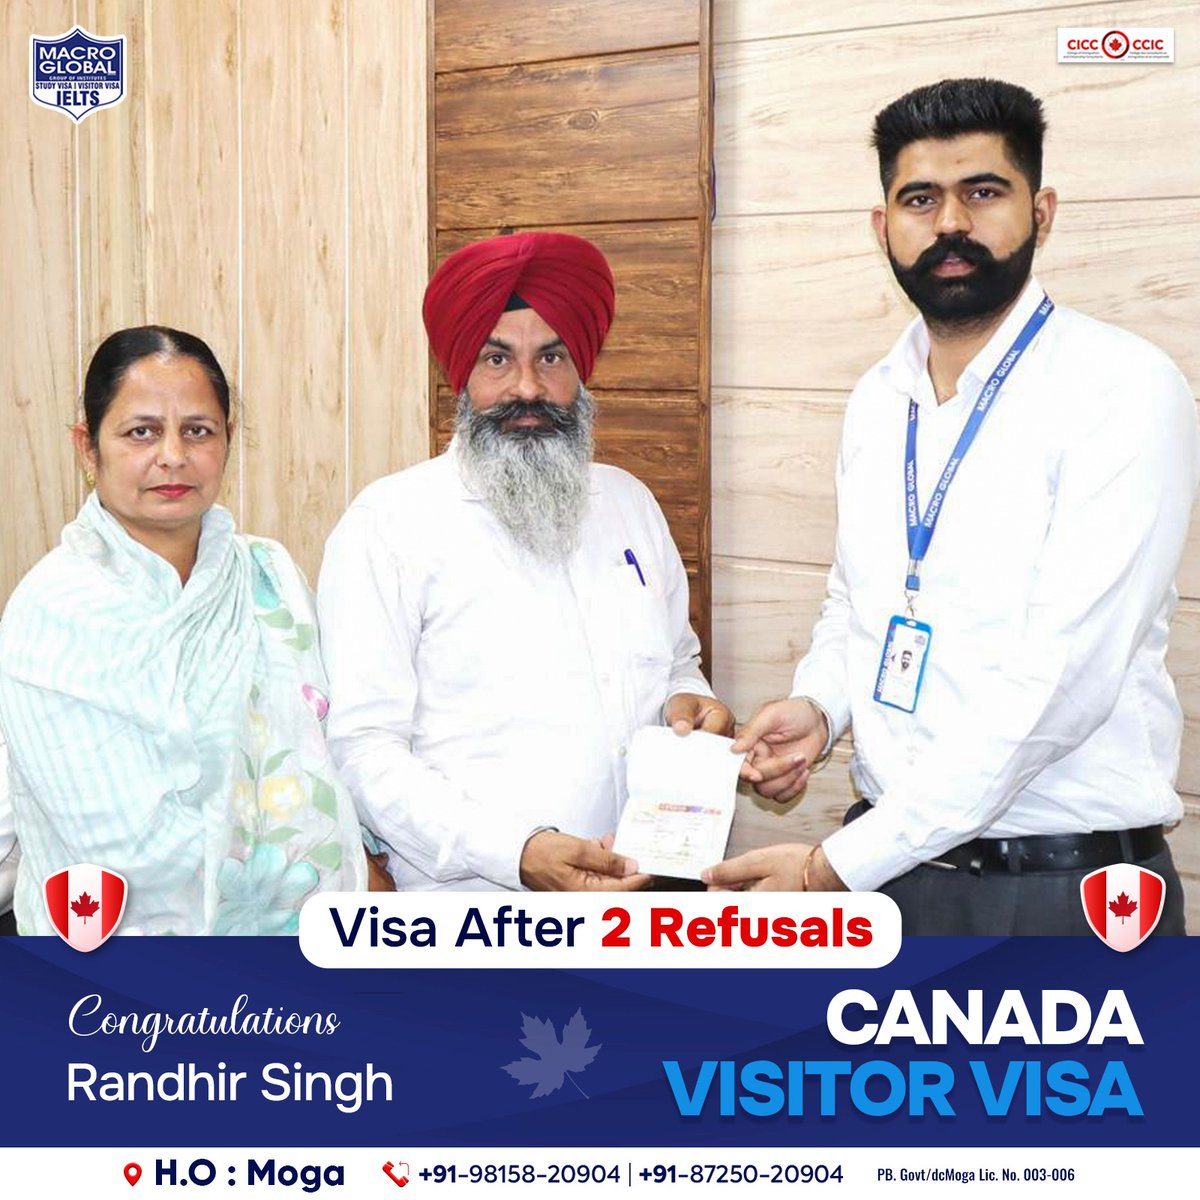 The third time's the charm for Randhir Singh! 🇨🇦 His Canada Visitor Visa application was finally approved.

#MacroGlobal #GurmilapSinghDalla #Canada #Canadastudyvisa #canadaopenworkpermit #spousevisa #Visitorvisa #Visa #IELTS #EnrollNow #Immigration #immigrationlawyer #Moga